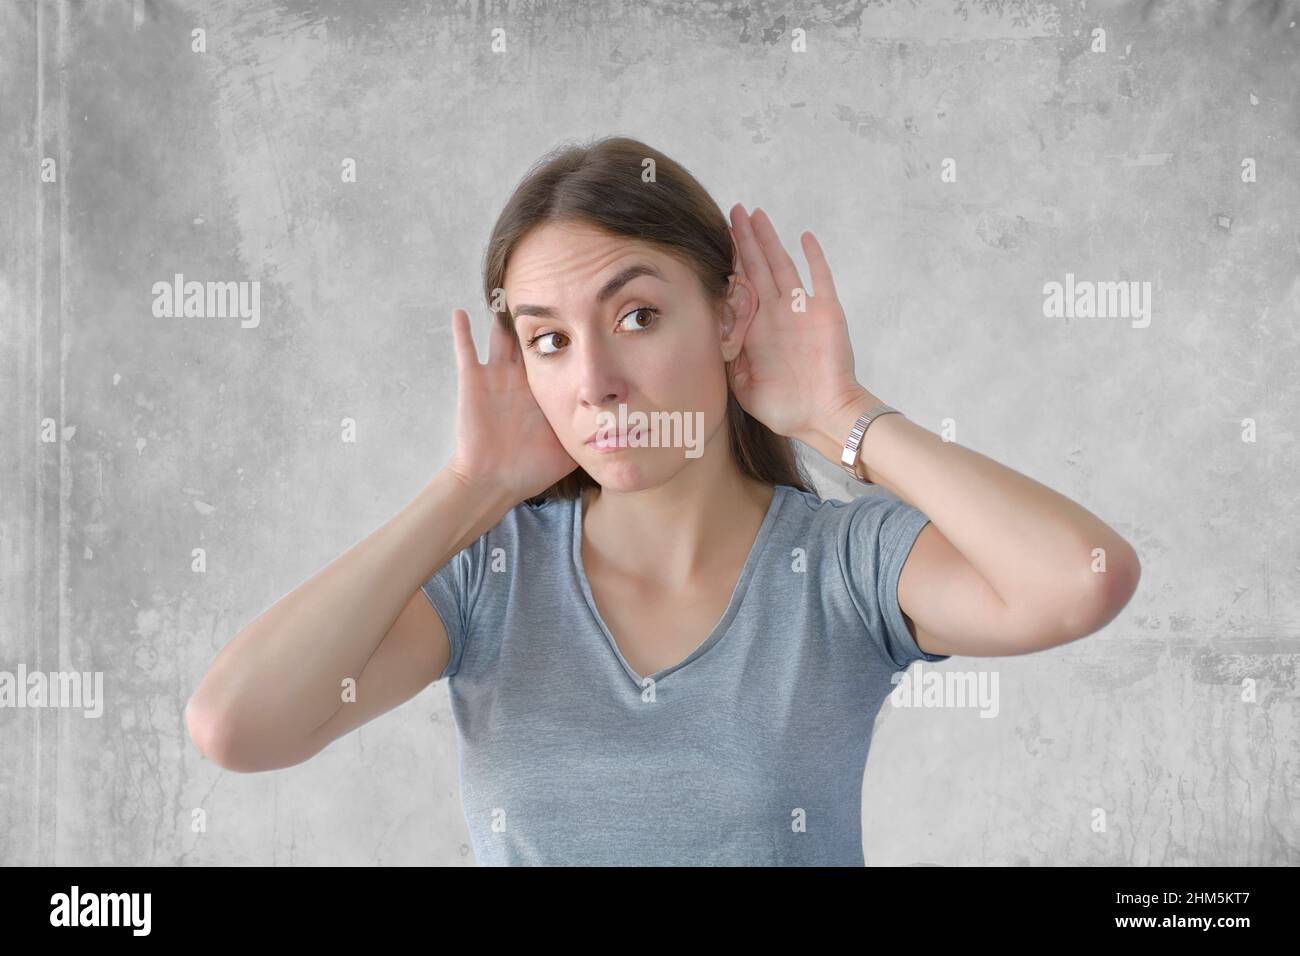 Young beautiful woman over background with hand over ears listening Stock Photo